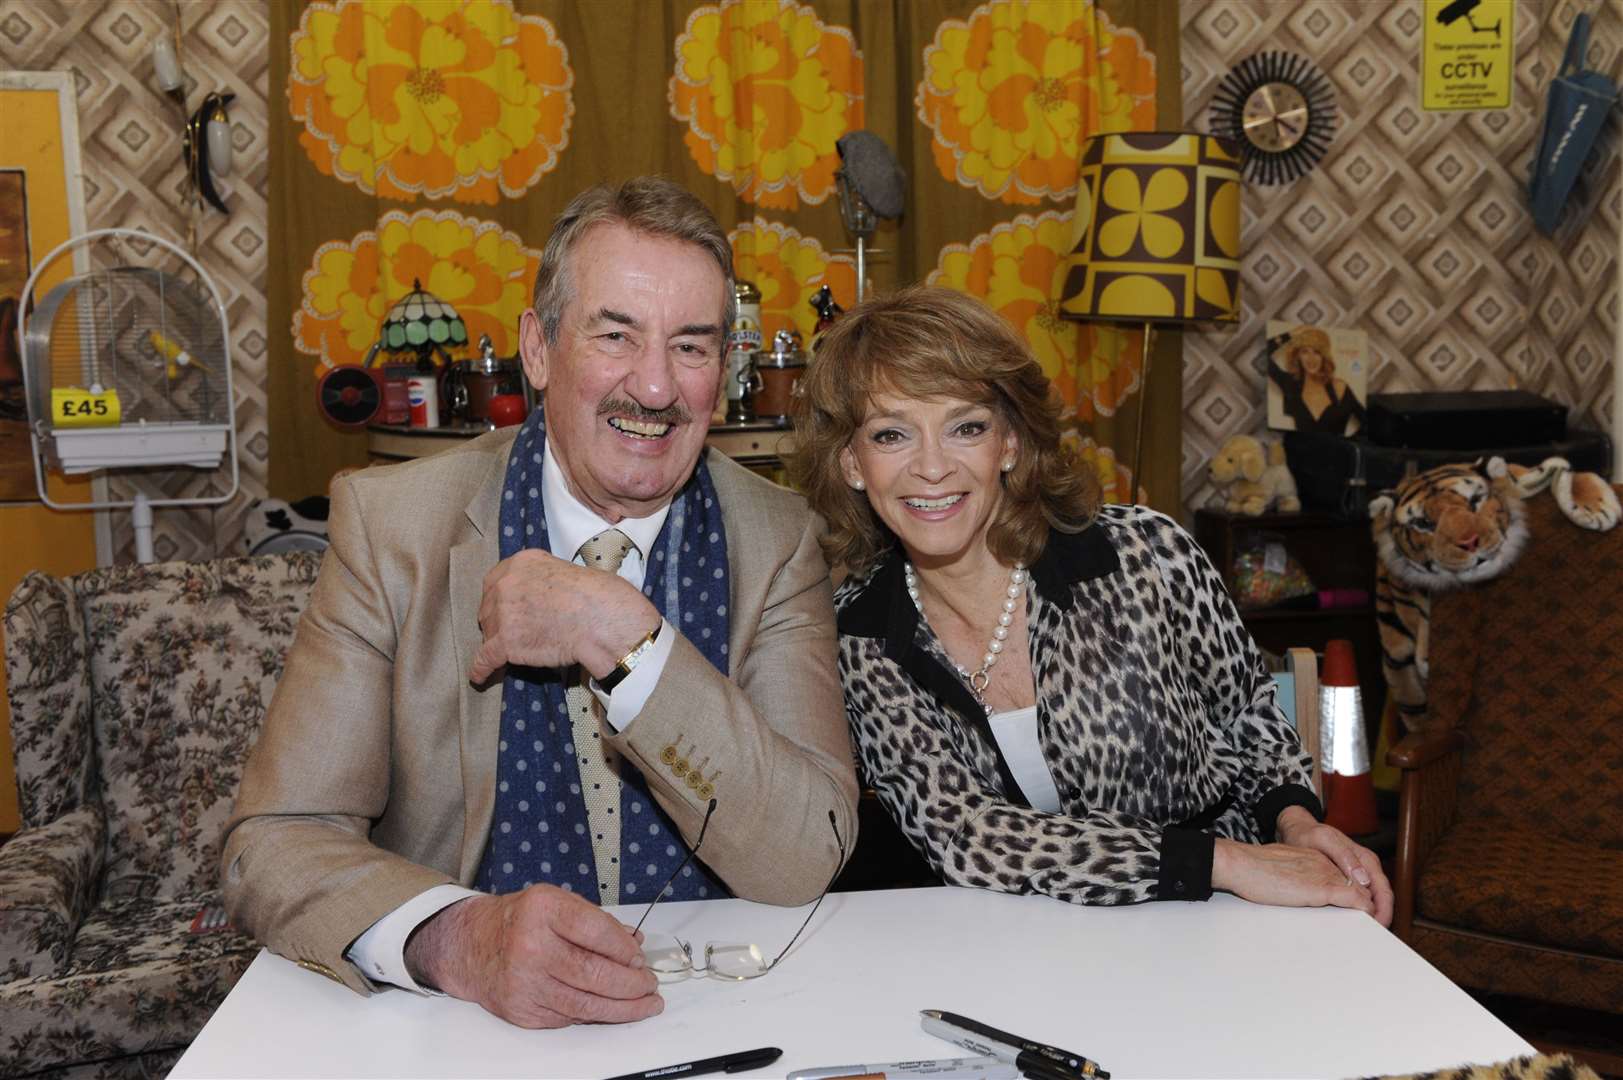 John Challis, pictured here with Only Fools and Horses co-star Sue Holderness, has thrown his weight behind The Dump. Picture: Tony Flashman.